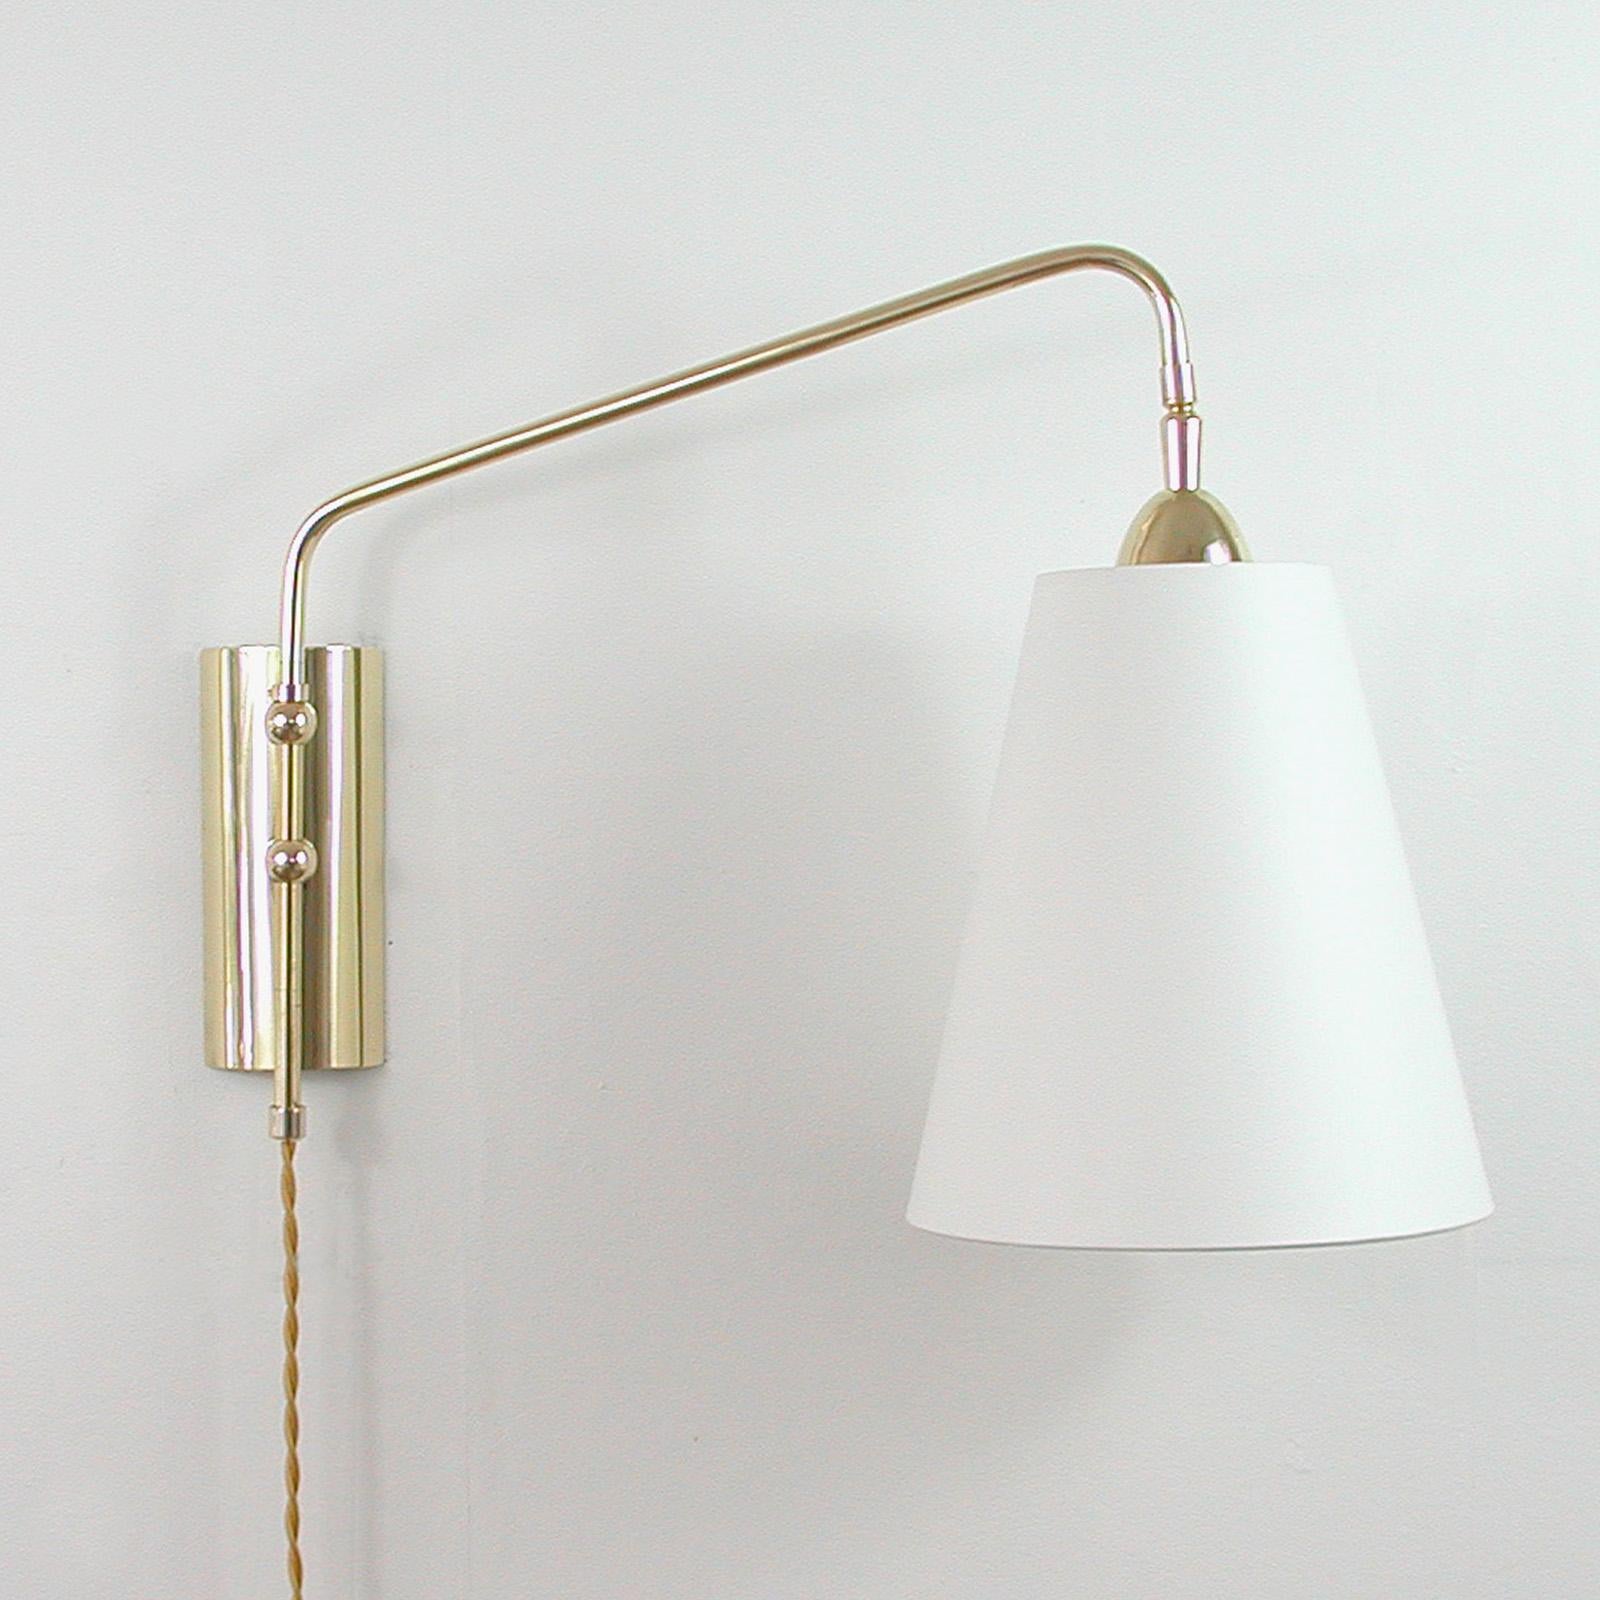 This Mid-Century Modern swing arm wall light was designed and manufactured in Austria in the 1960s. It features a brass back plate and an articulating lamp arm. The handmade lamp shade is off-white silk and is new. The direction of the shade is